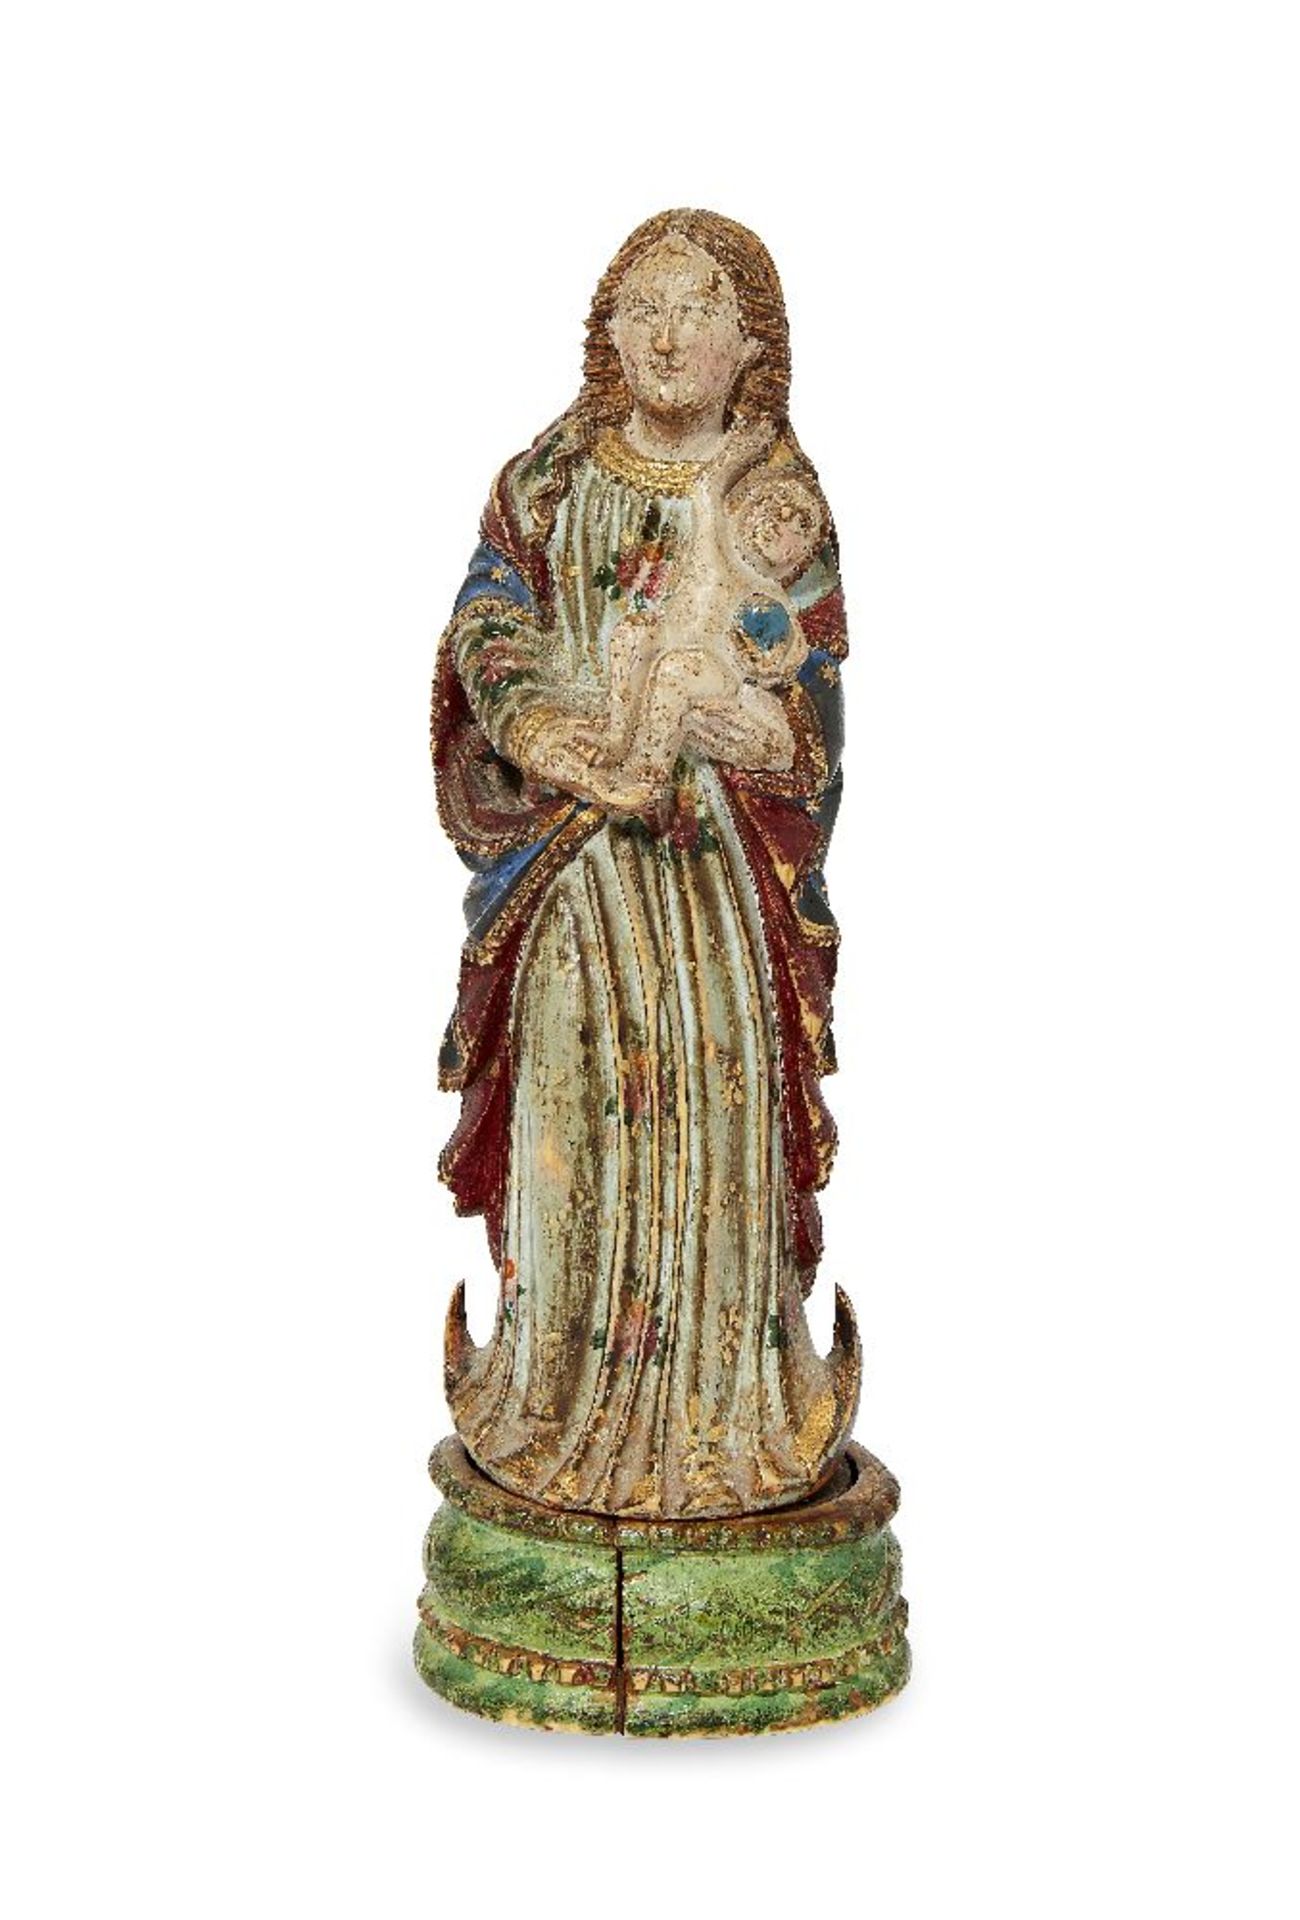 A Goanese polychrome ivory figure of the Virgin and Child, late 17th century, the Child depicted